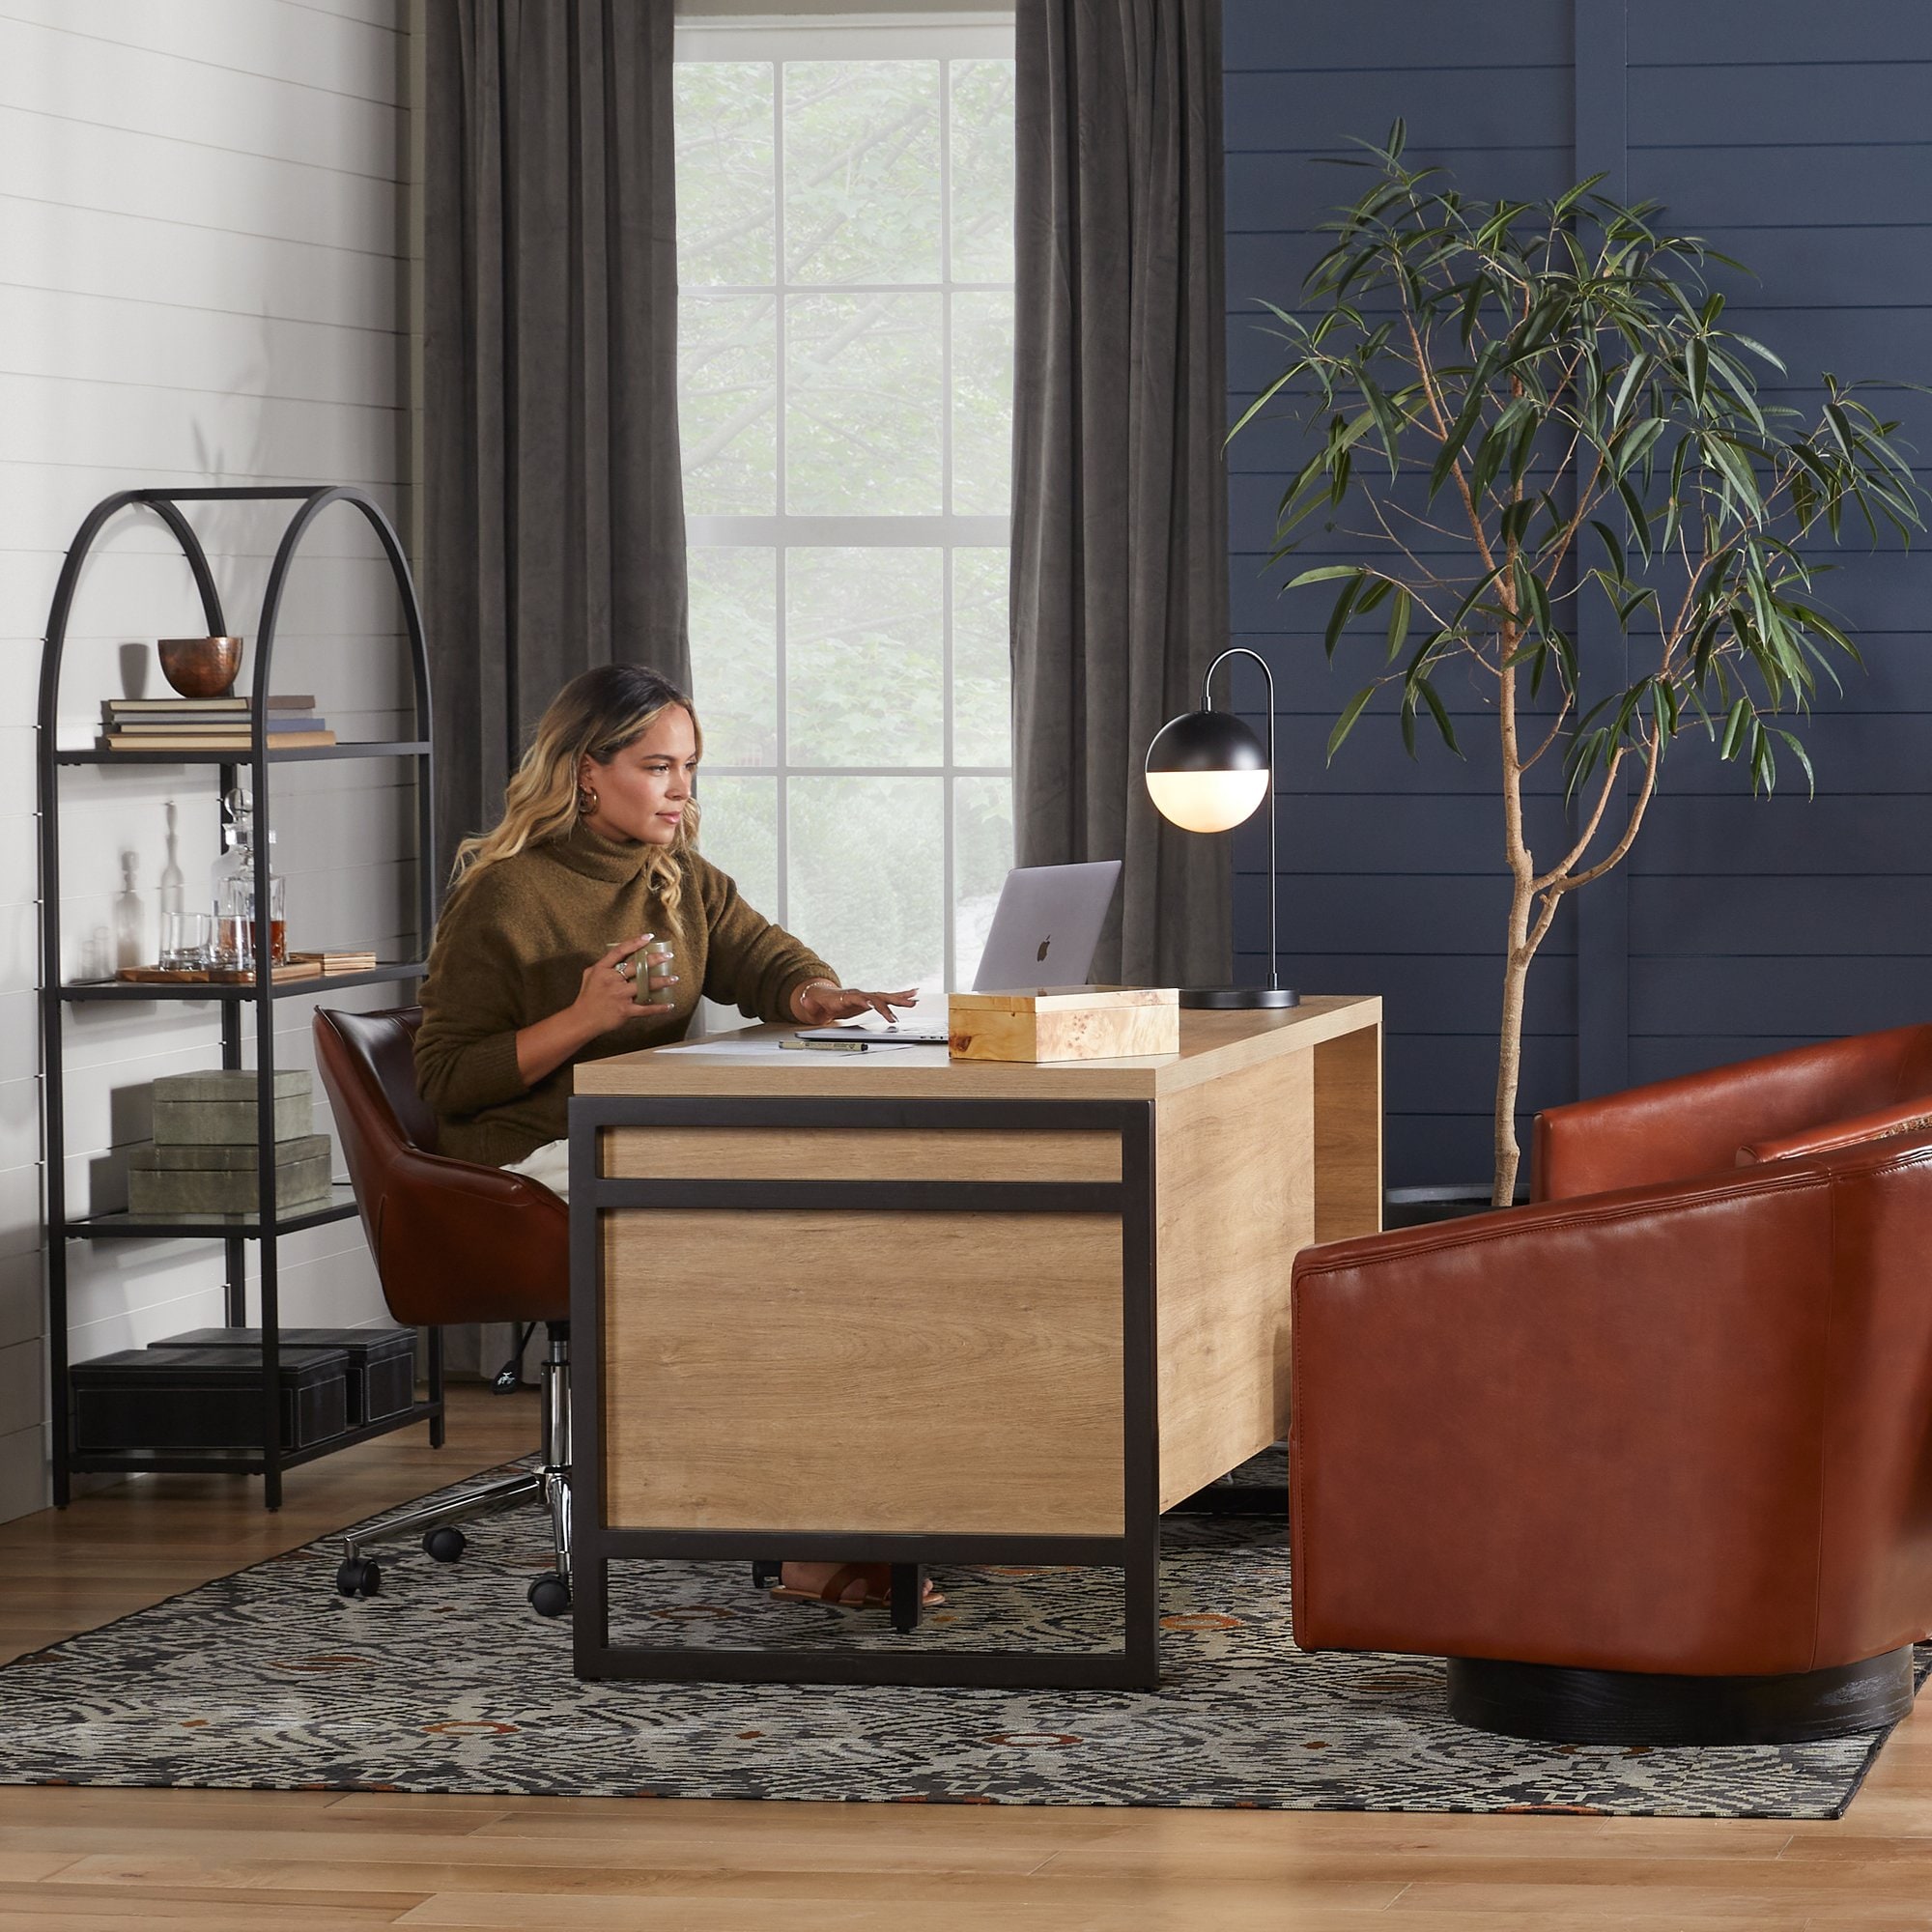 save an extra 10% on Select Home Office Furniture*